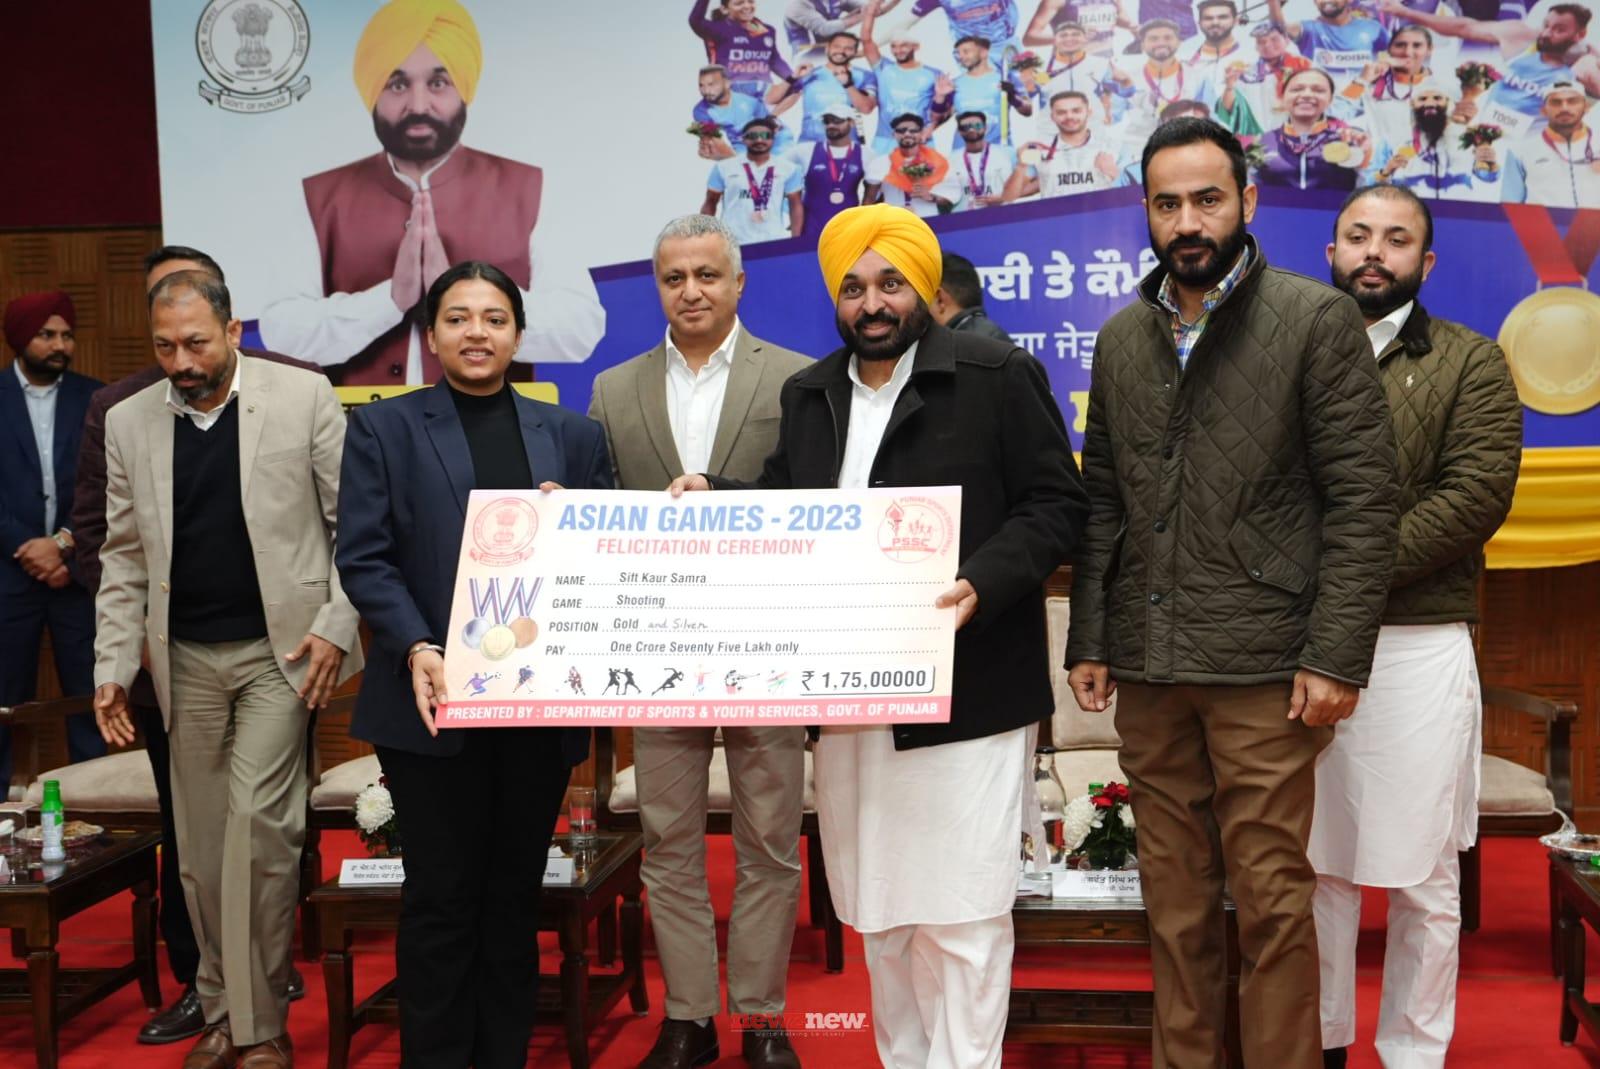 Asian games and National games winners thank Punjab Government for giving cash awards of RS. 33.83 crore